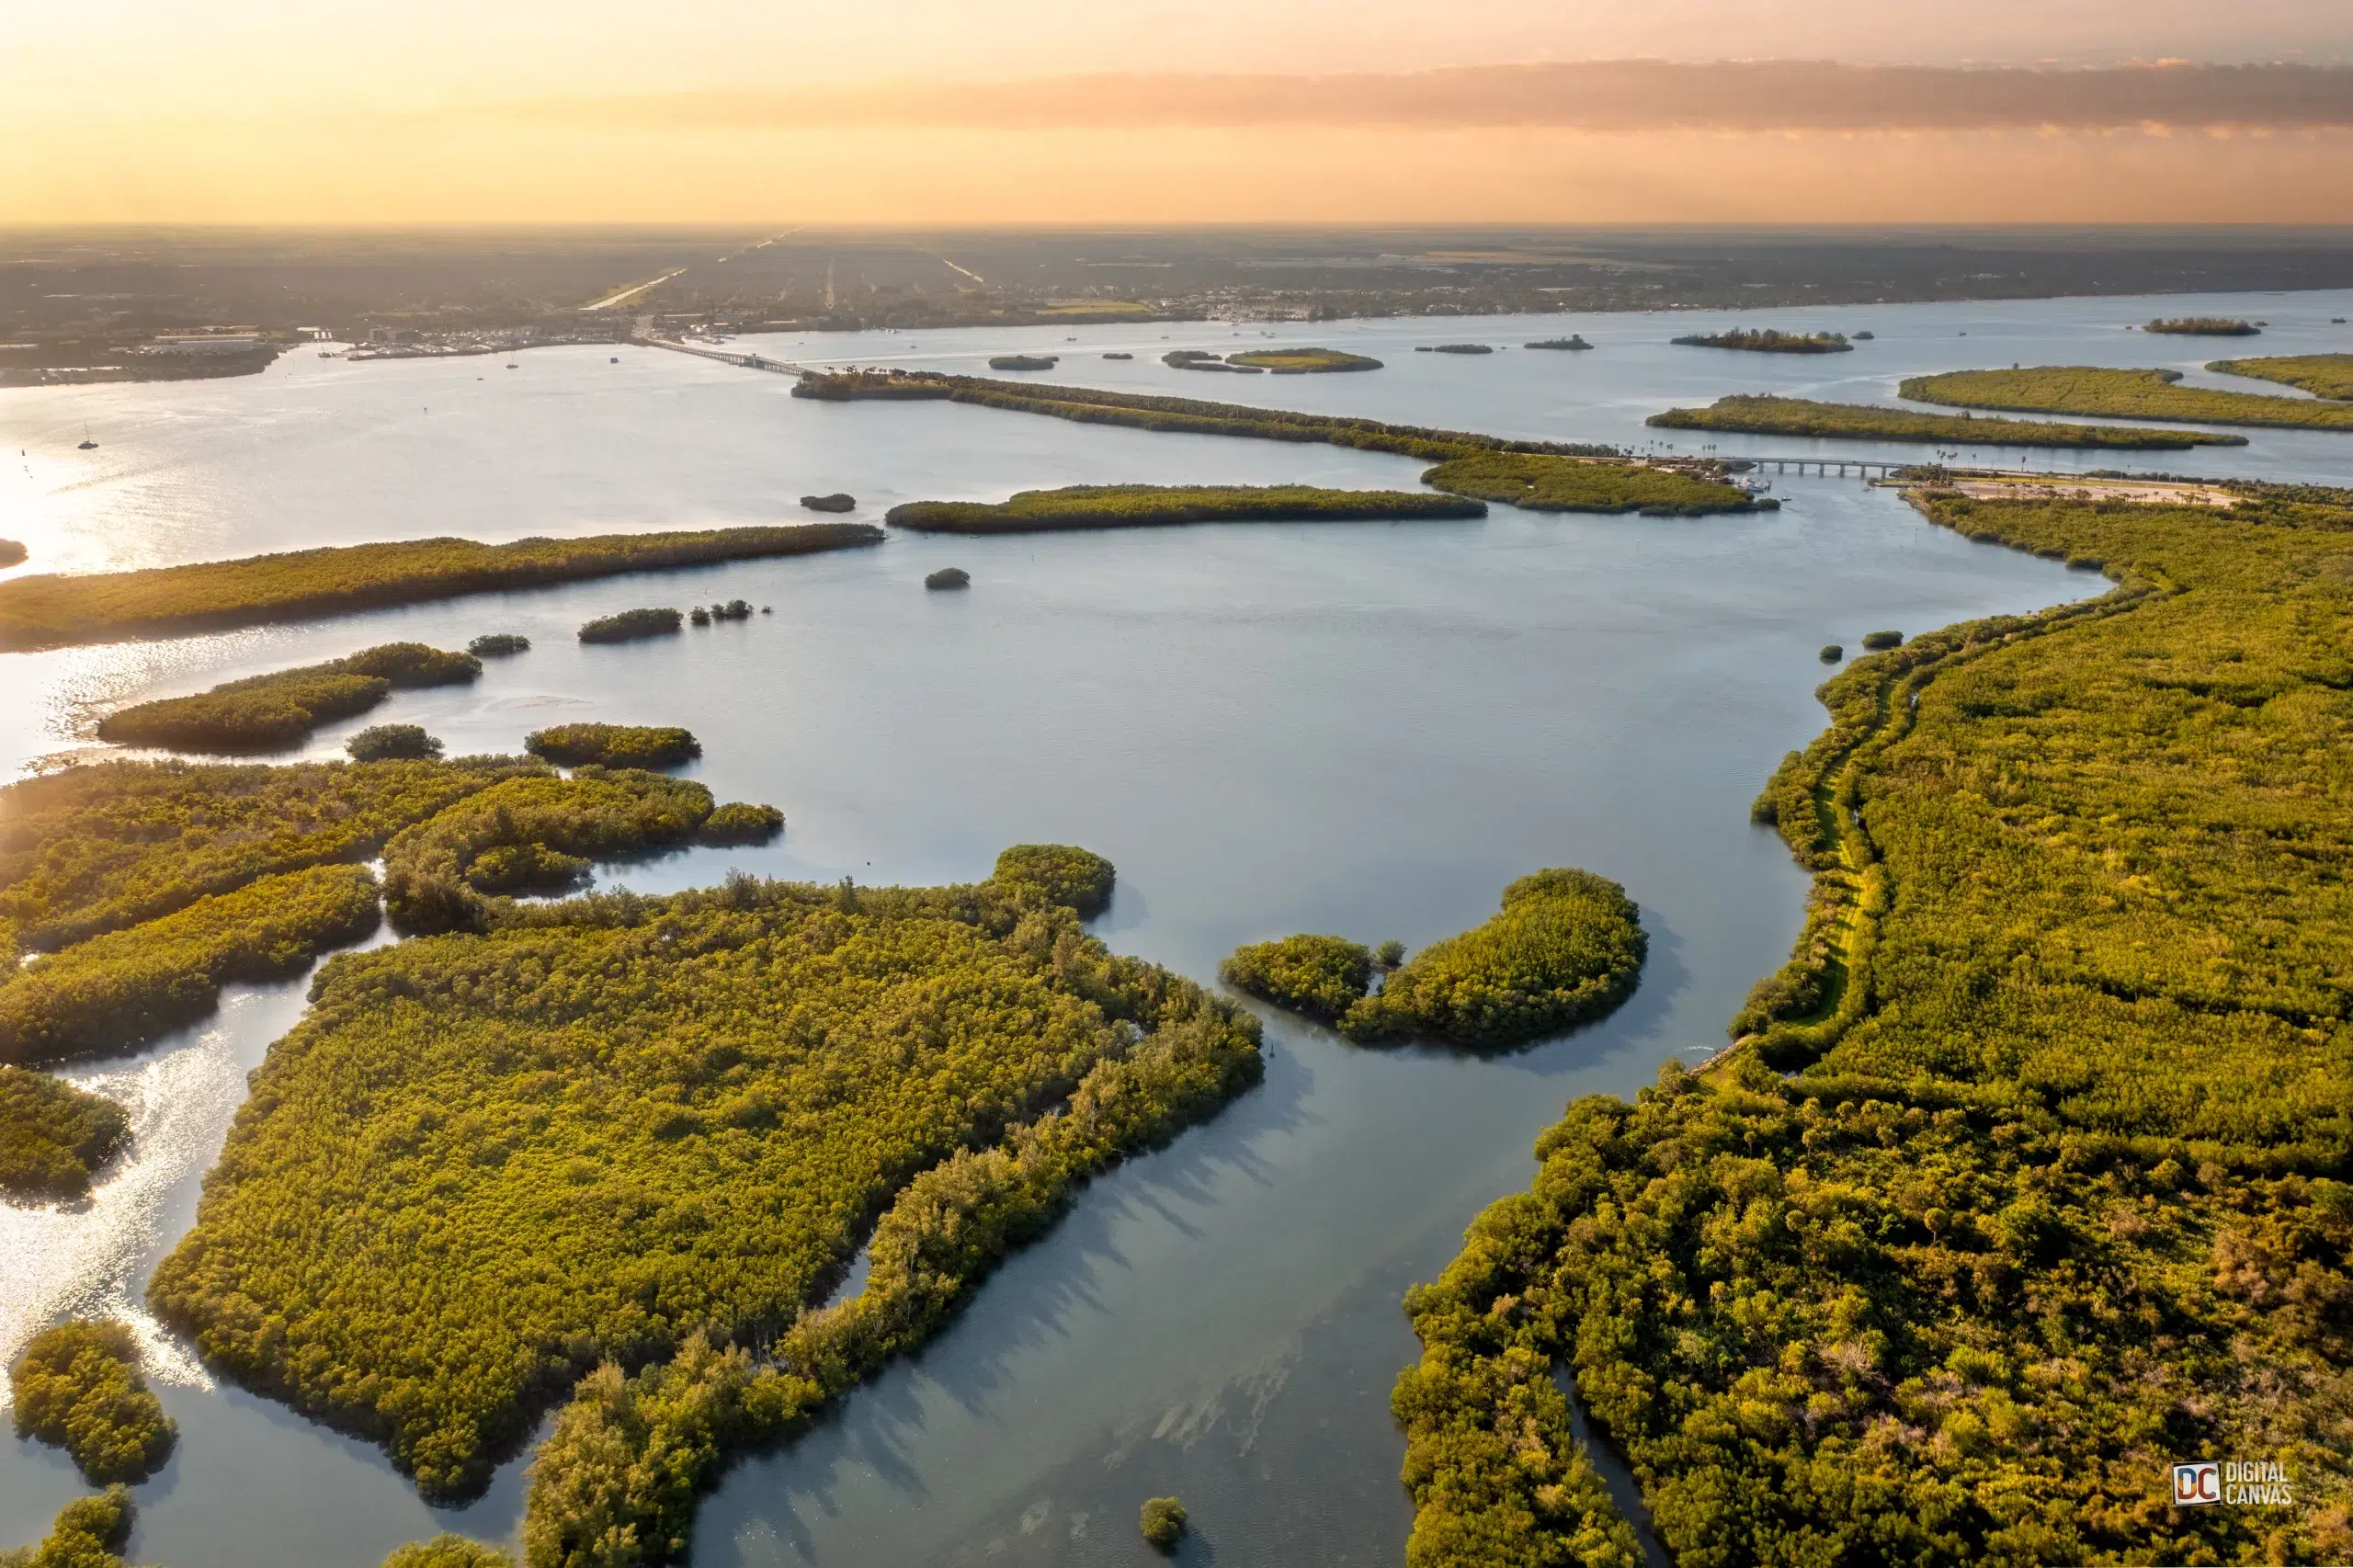 Aerial view of a sunlit mangrove estuary at sunset.